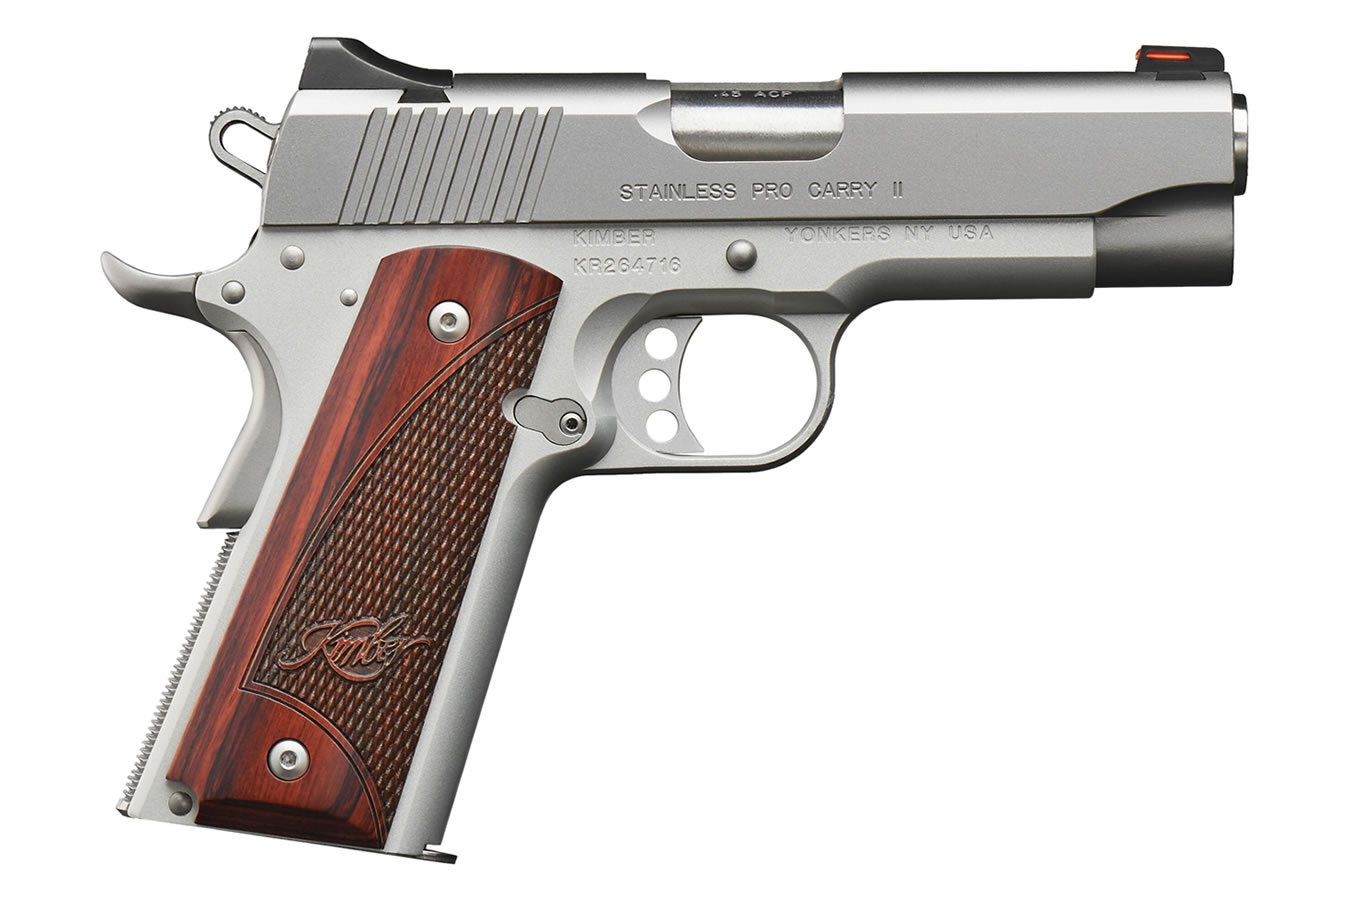 No. 17 Best Selling: KIMBER STAINLESS PRO CARRY II .45 ACP